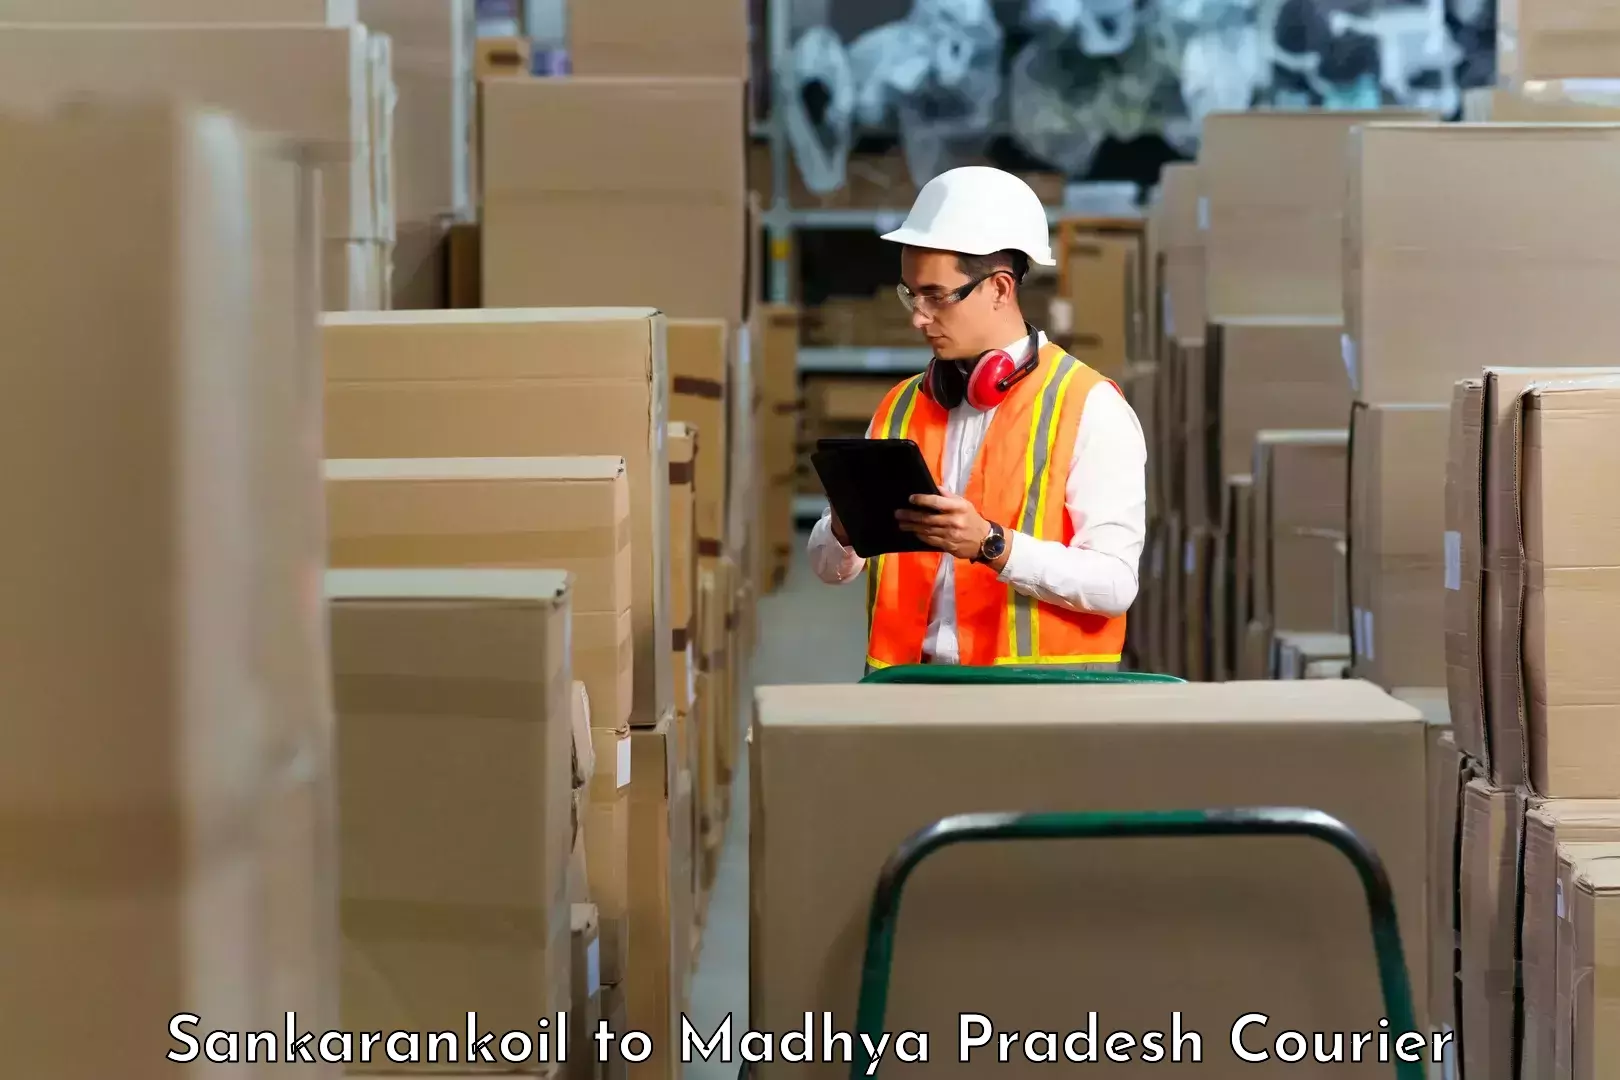 Reliable courier service Sankarankoil to Maheshwar